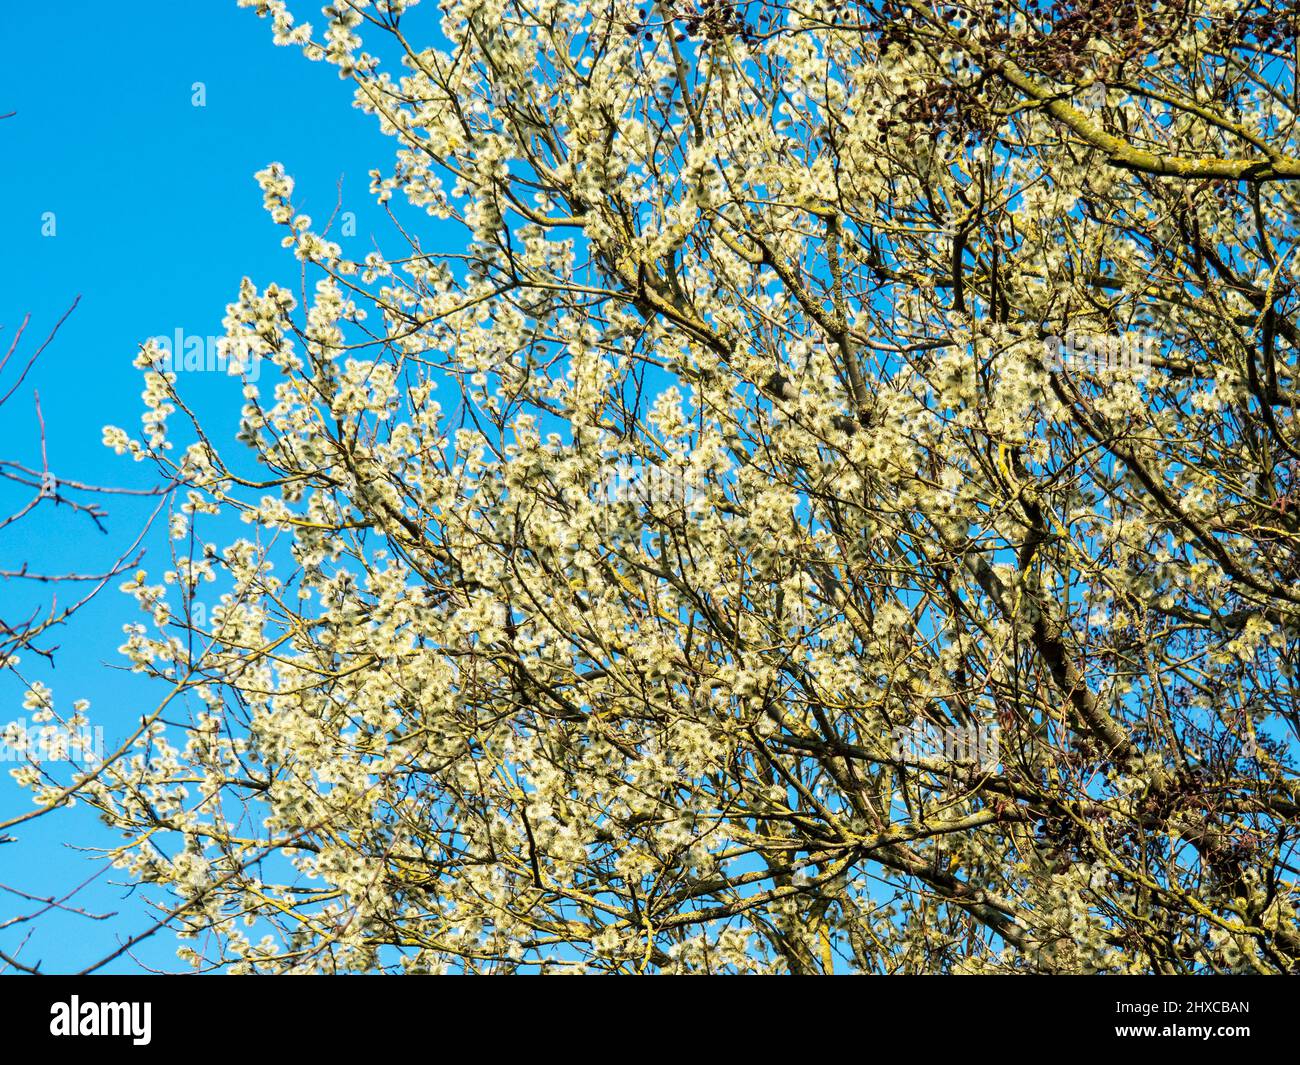 Willow tree covered in spring flowers against a blue sky Stock Photo